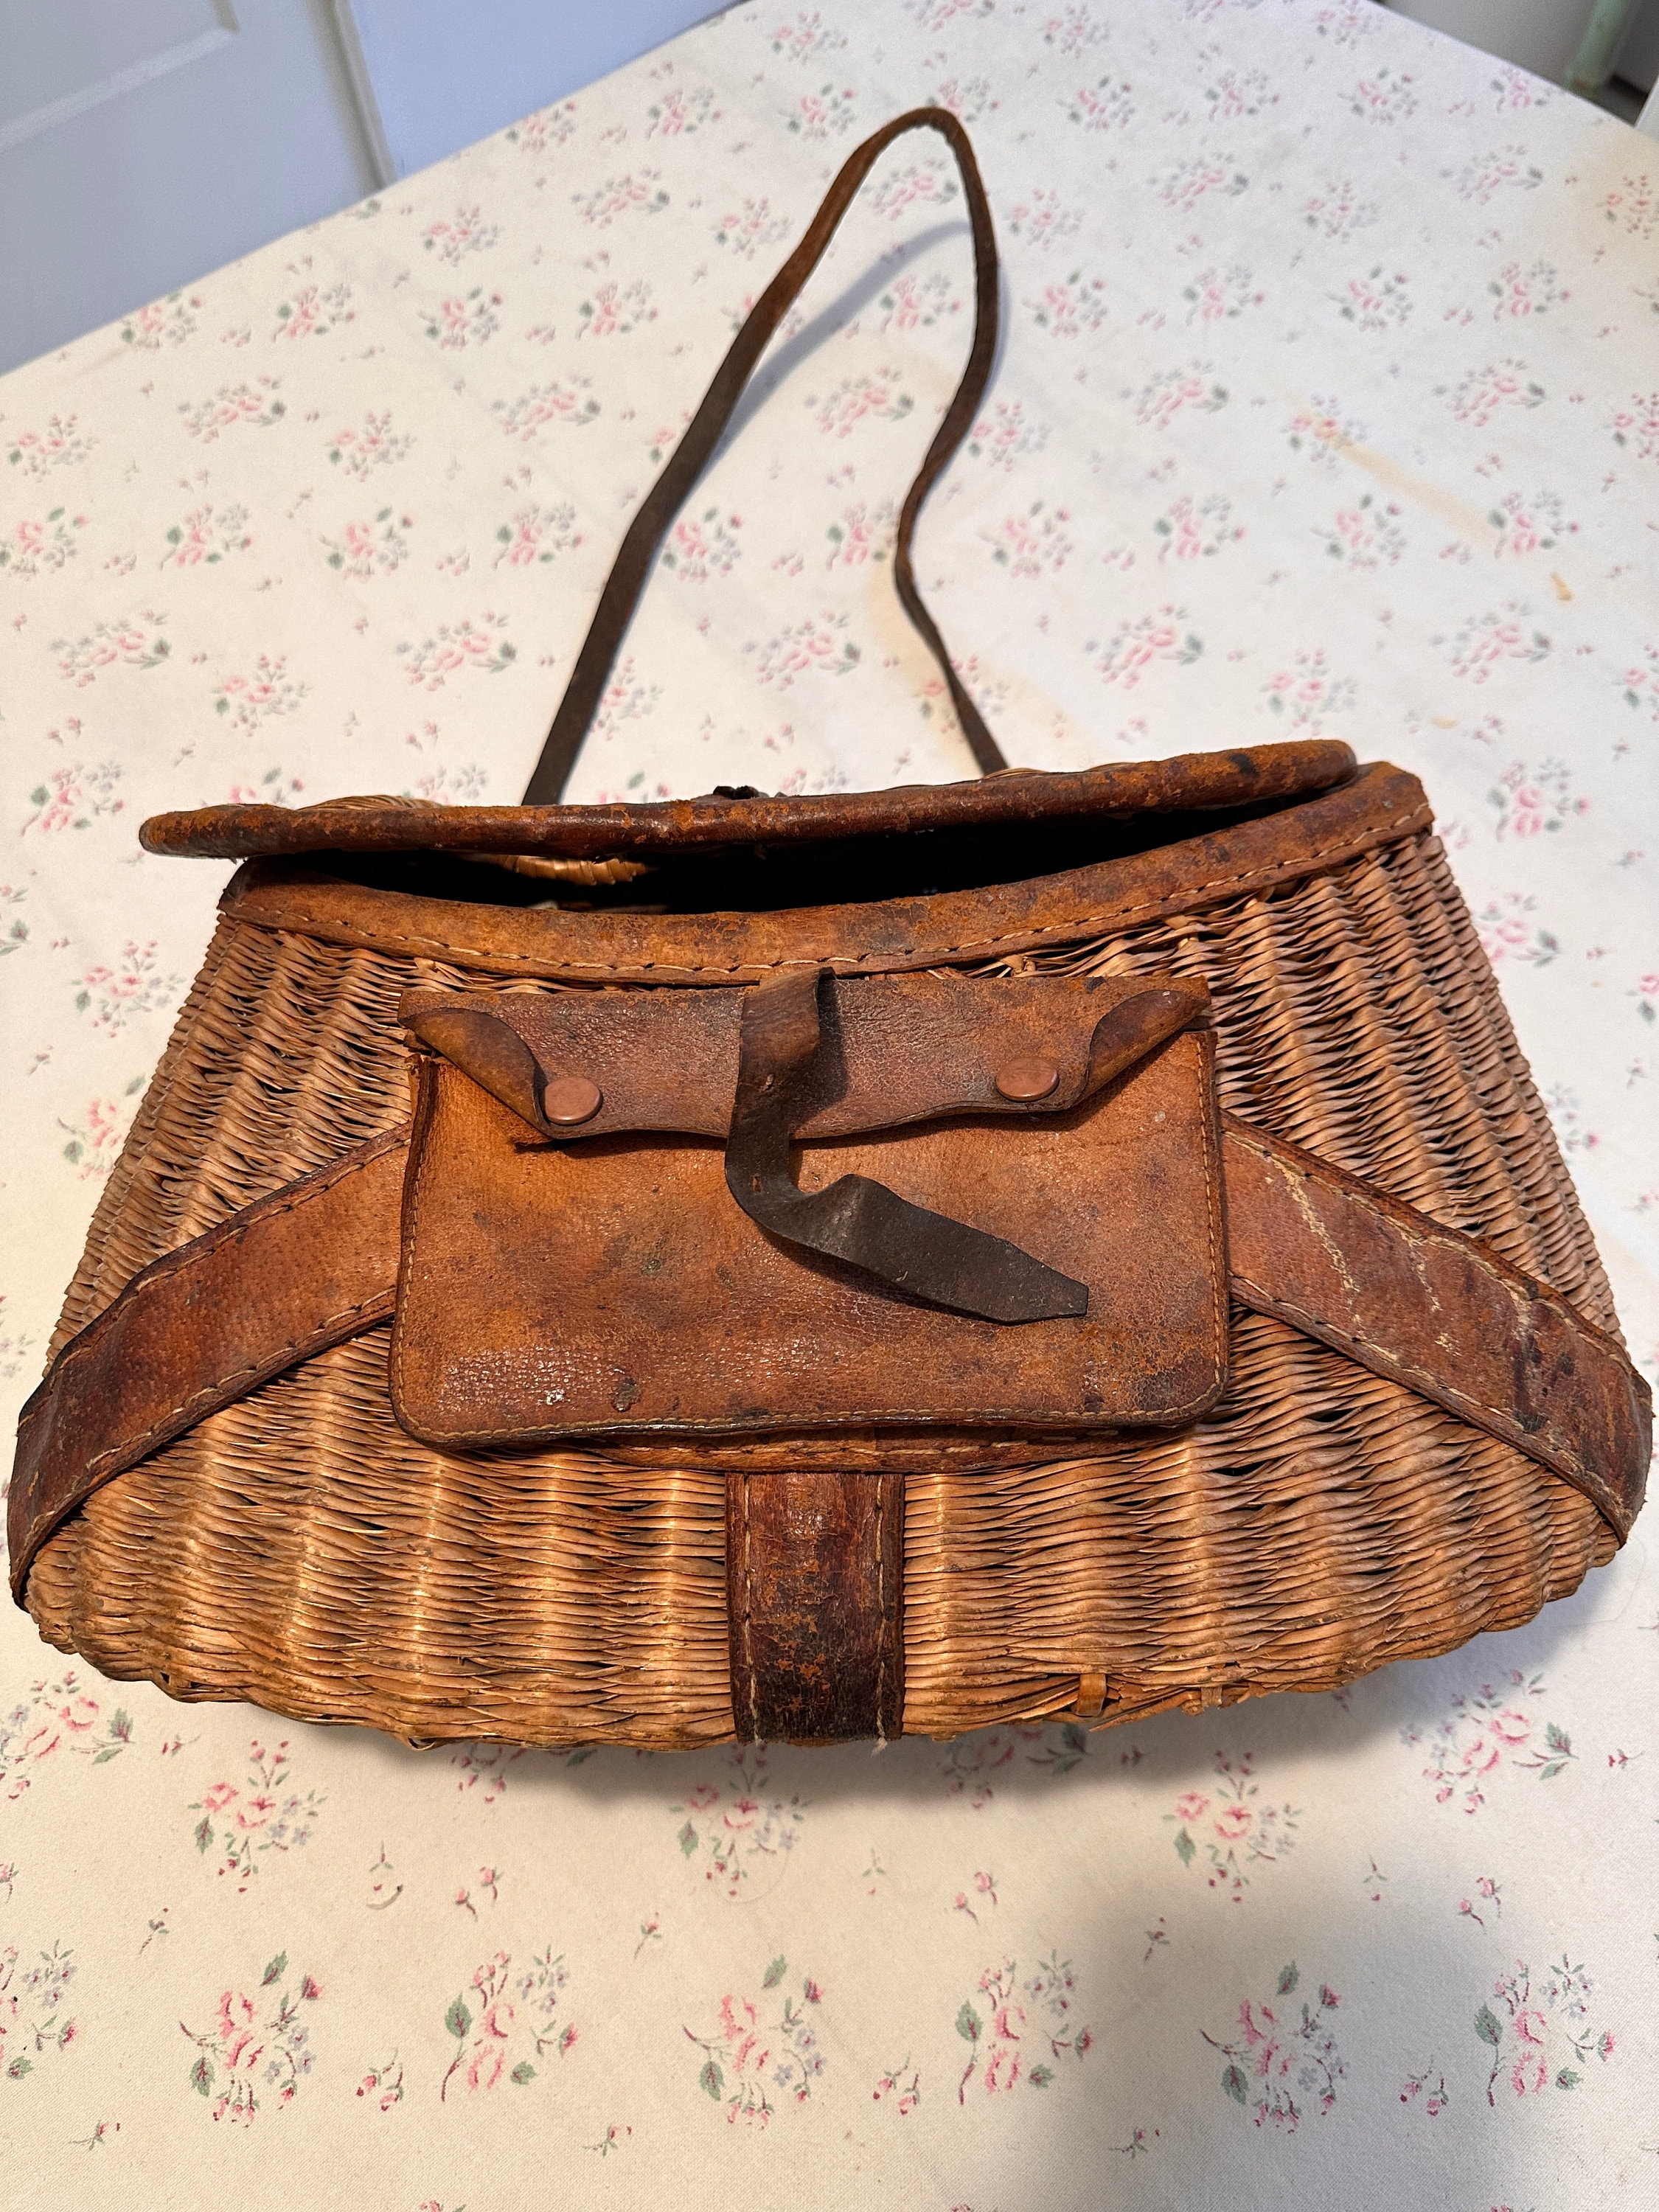 VINTAGE WICKER & LEATHER TROUT FISHING CREEL complete